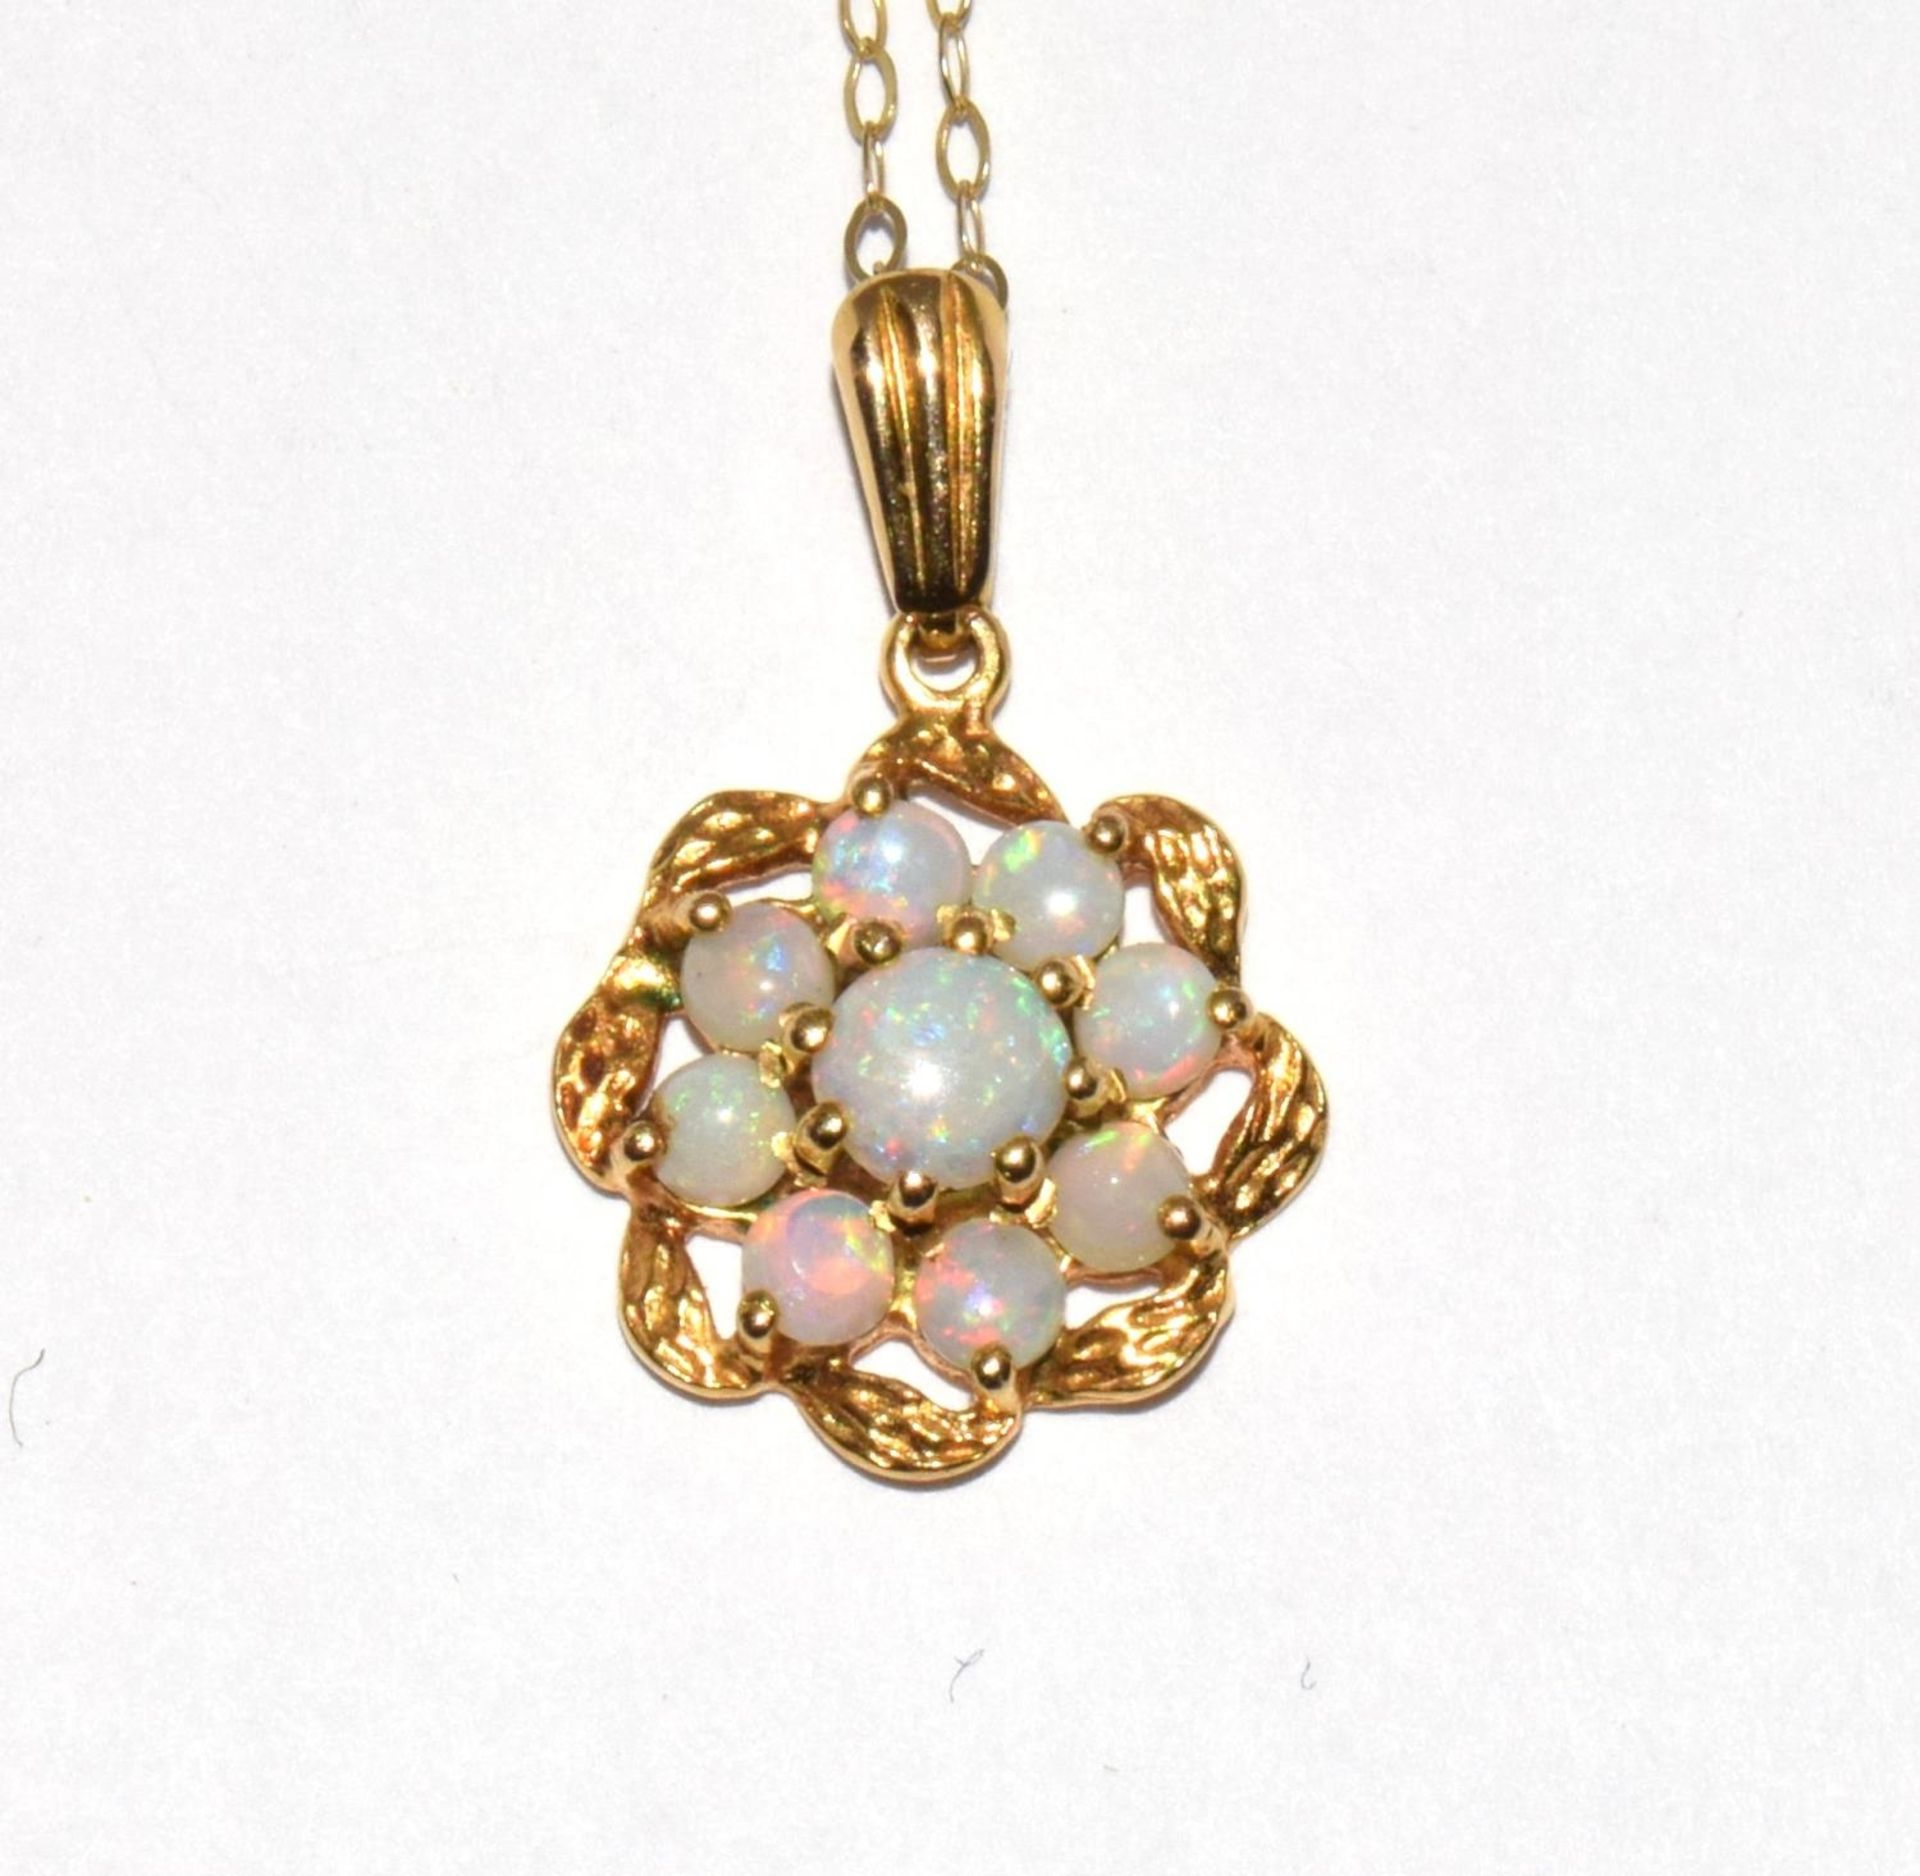 9ct gold ladies Opal cluster pendant necklace with a chain 40cm long - Image 2 of 6